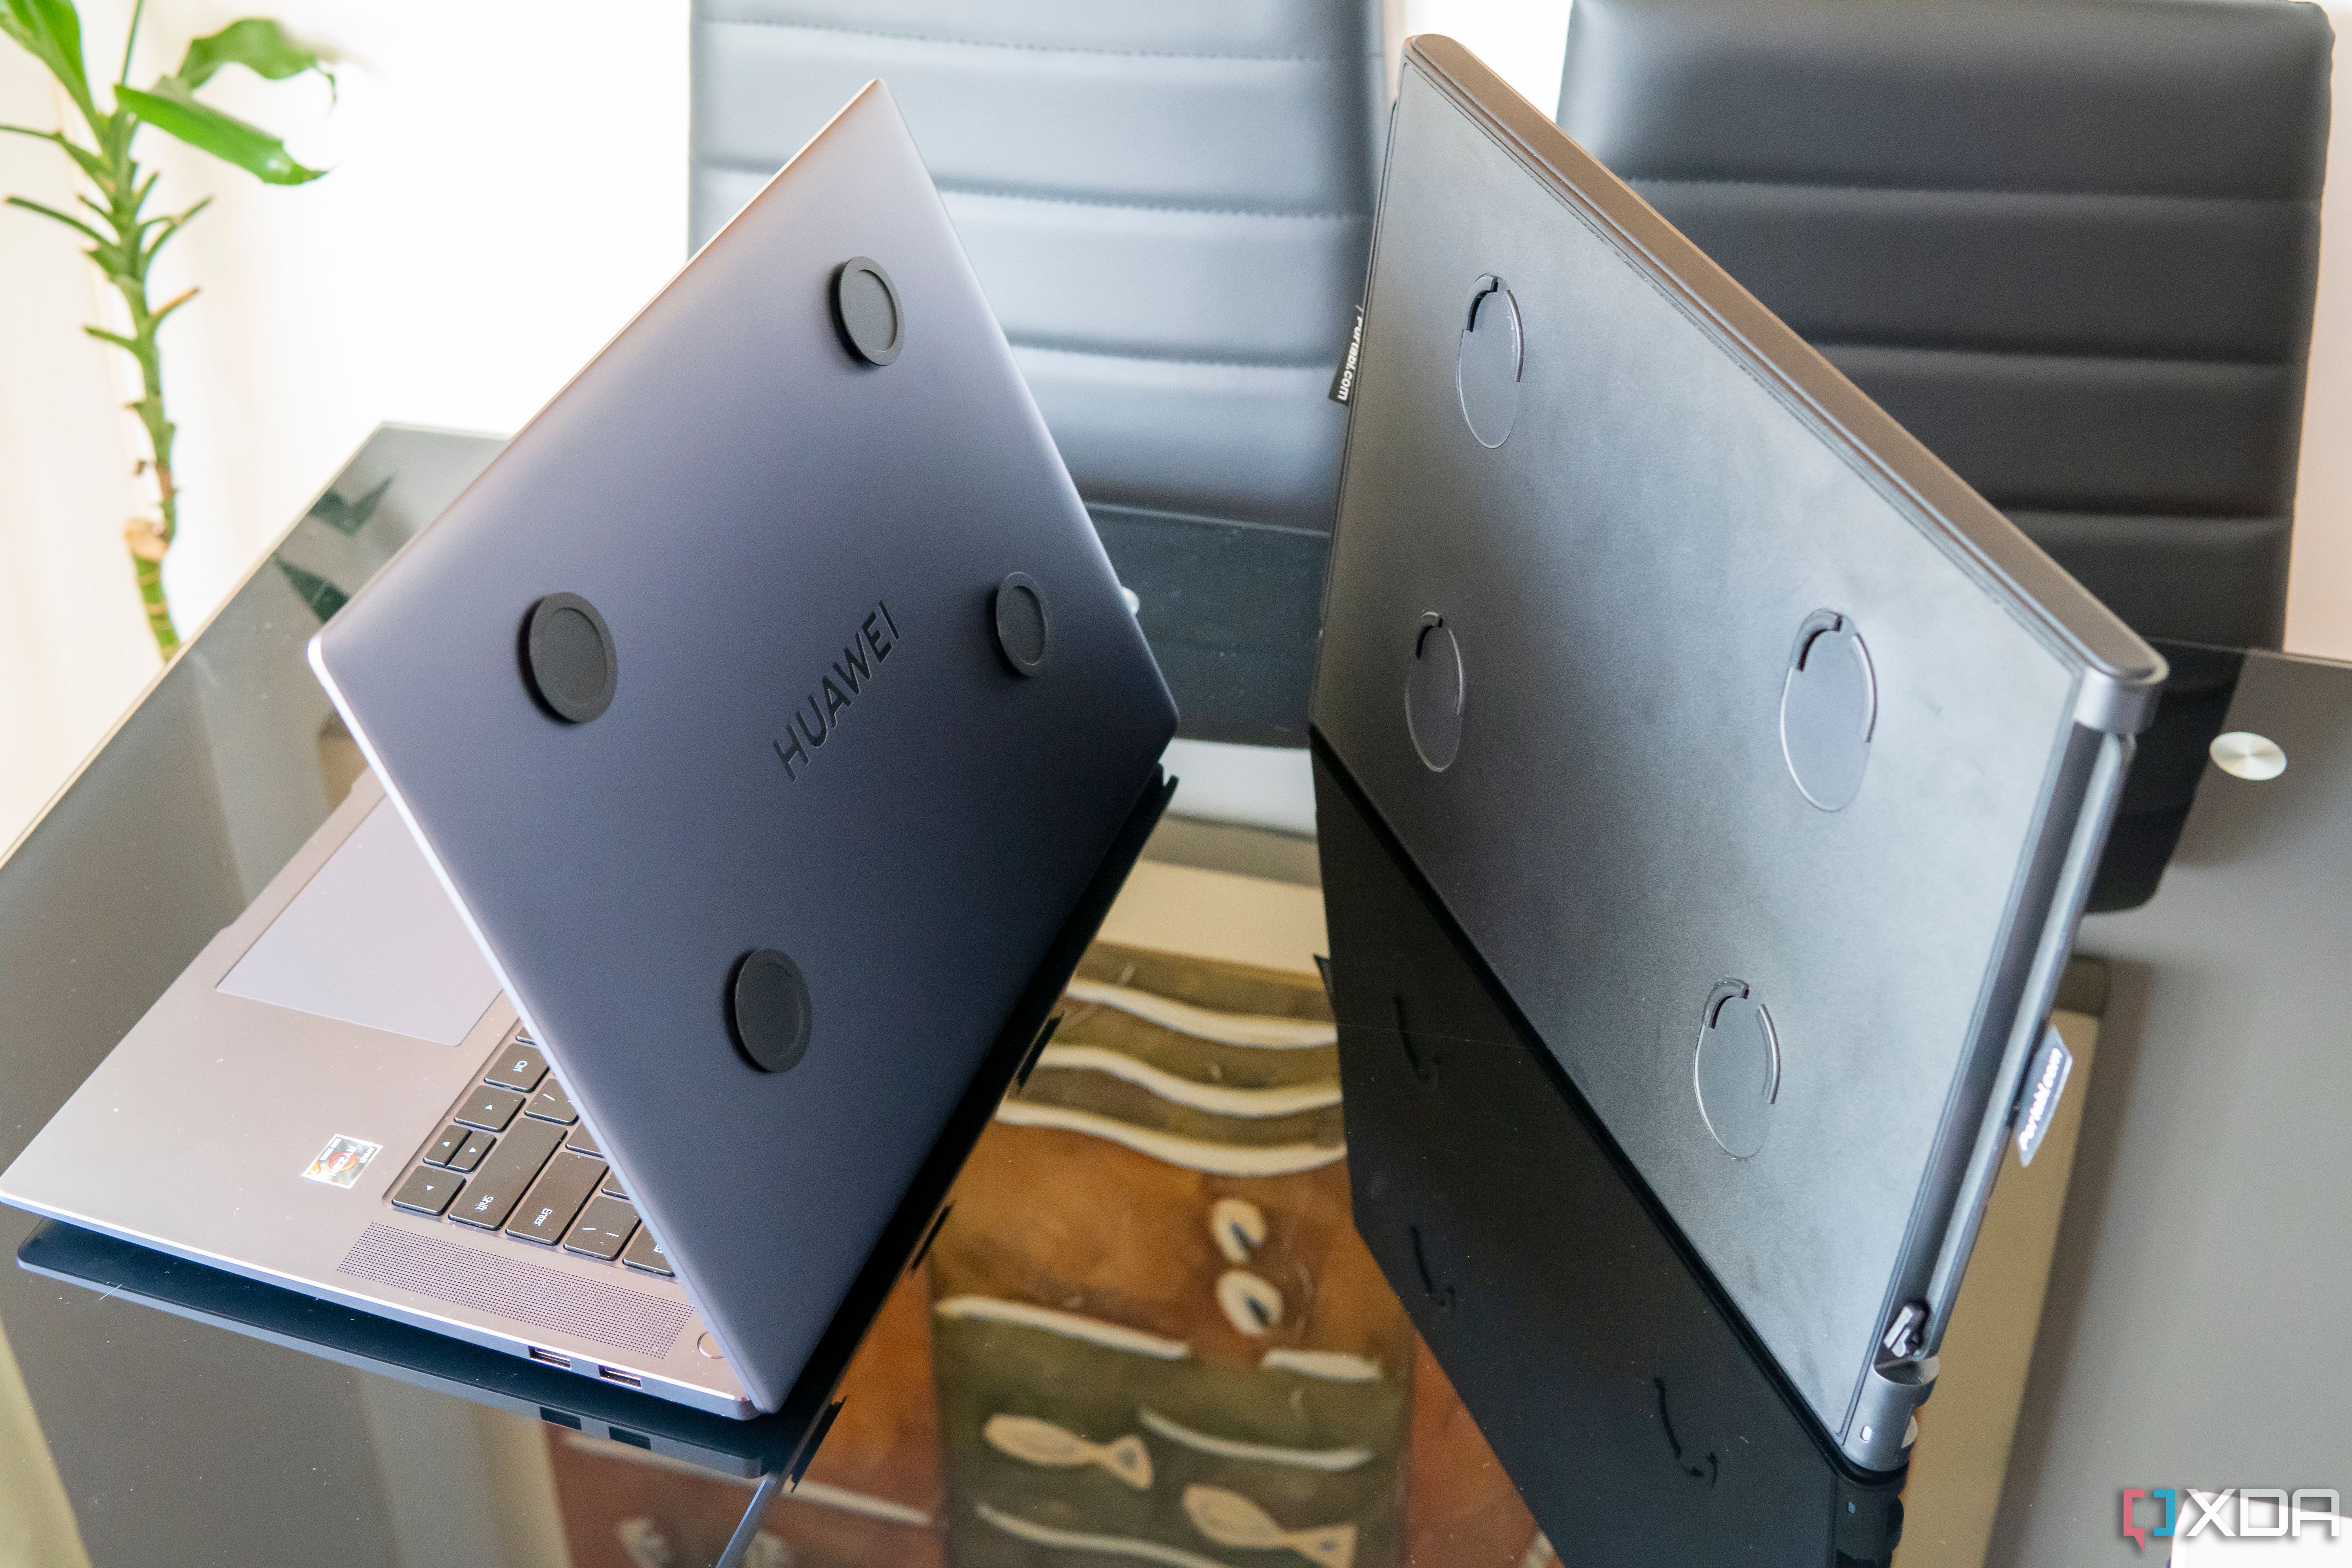 A Slide V2 unit next to a laptop with the respective mounting pads attached